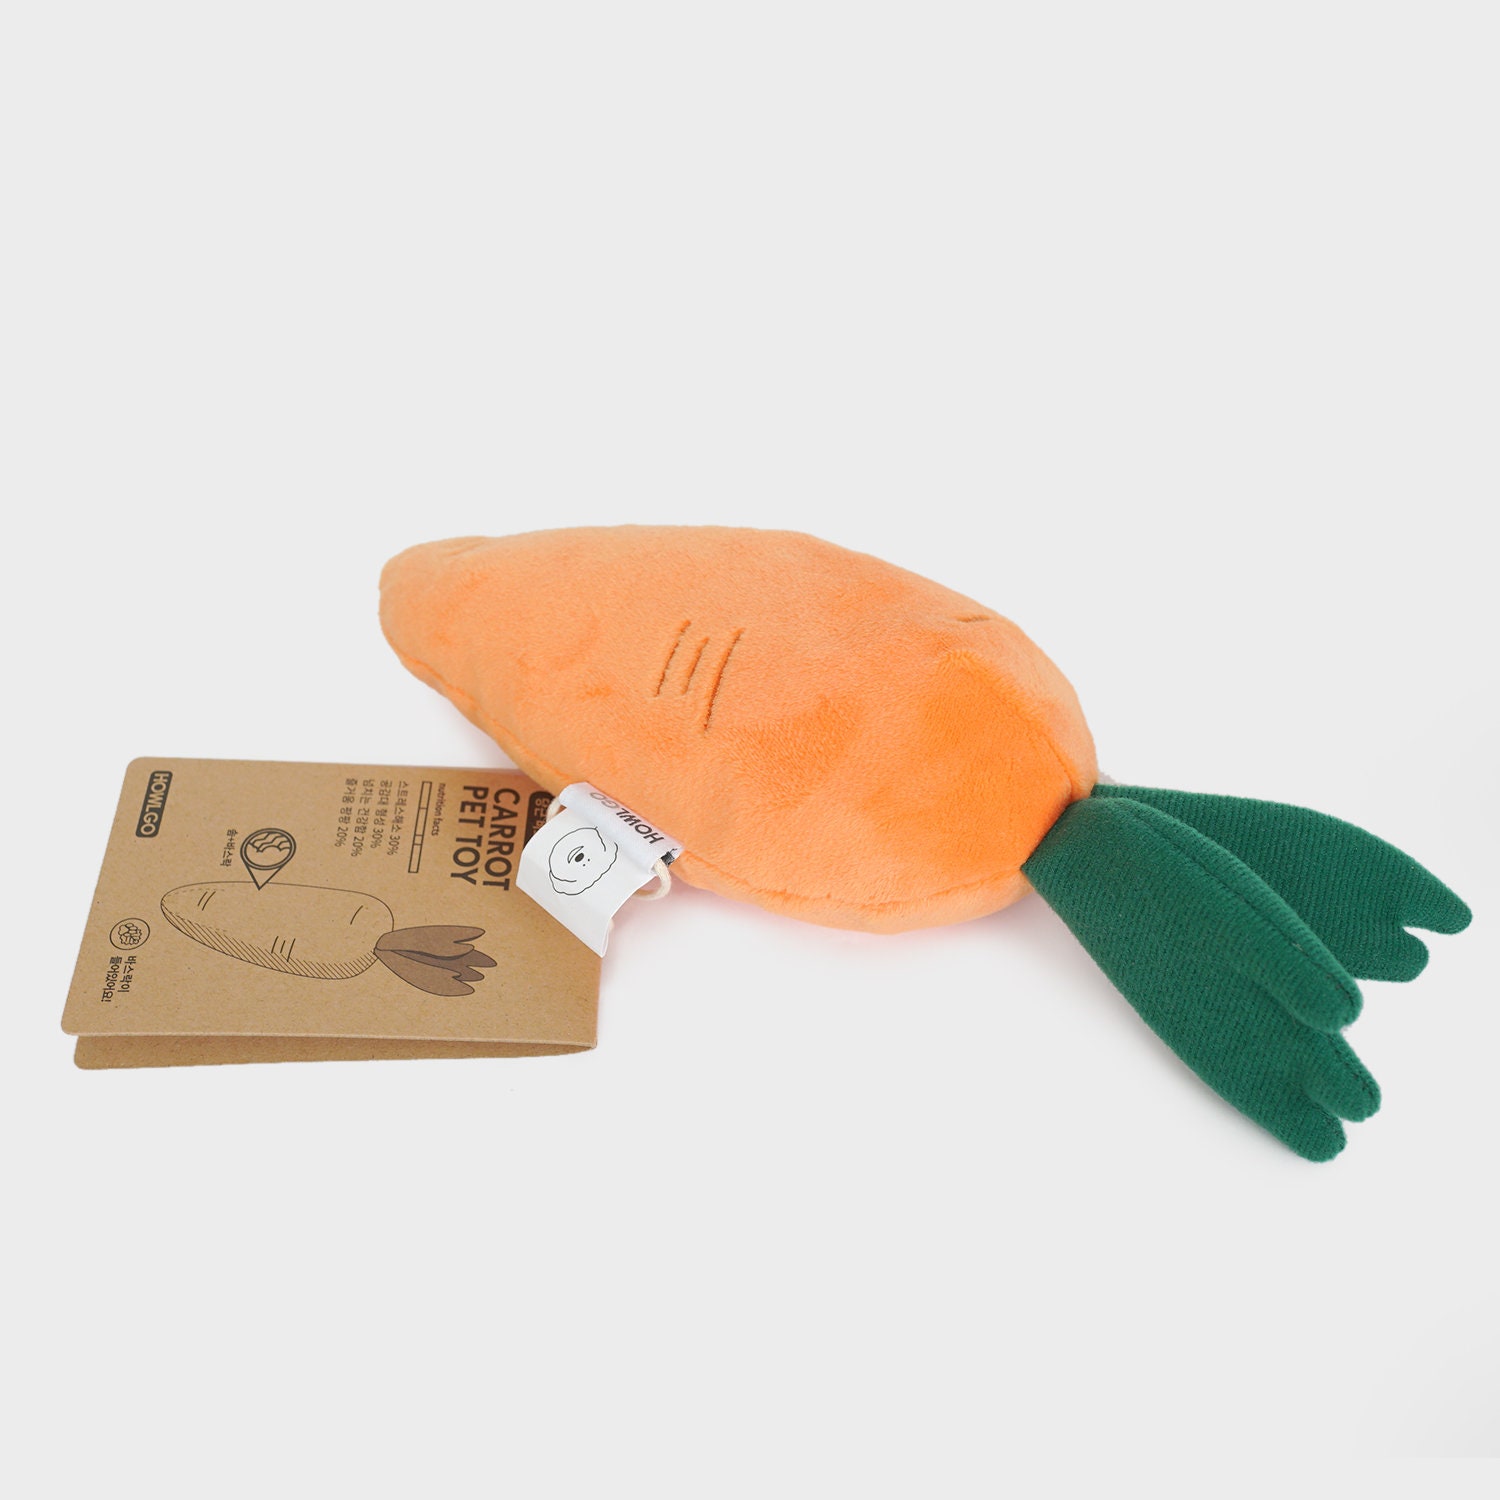 Midlee Plush Carrot Easter Dog Toy- Pack of 2